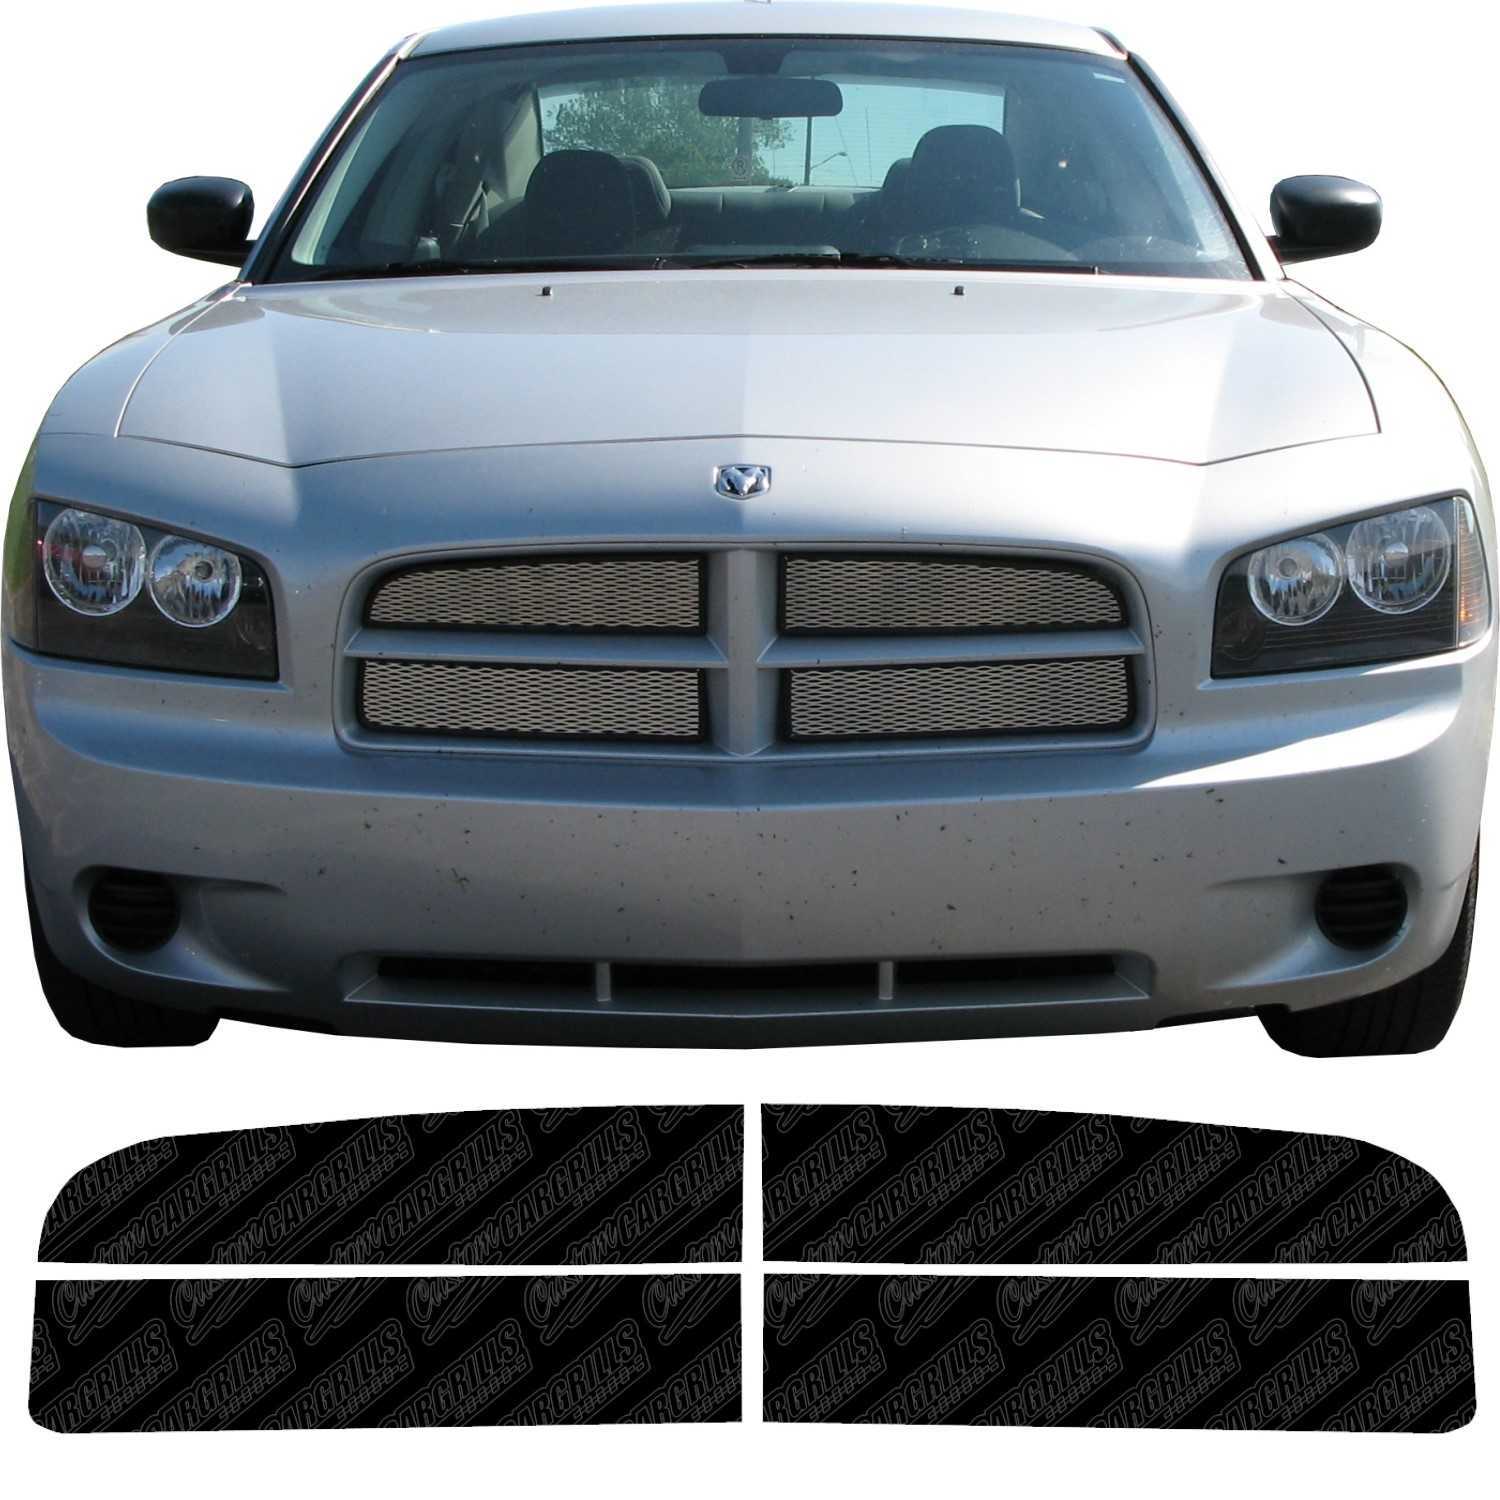 2005 - 2010 Dodge Charger Mesh Grill Template